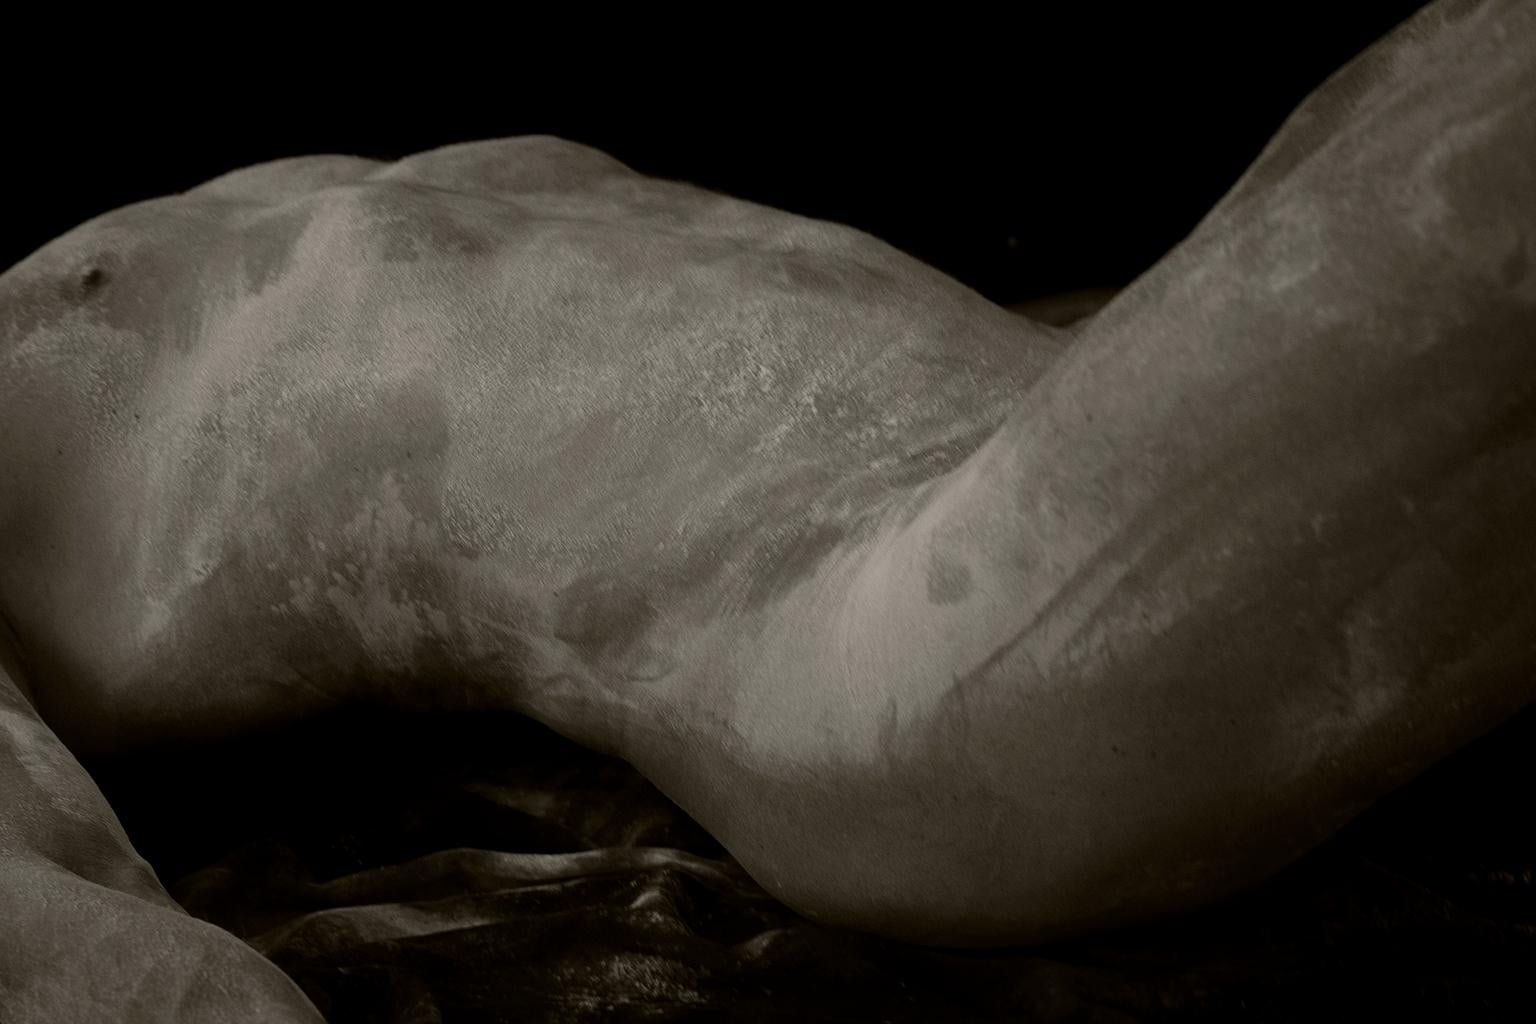 Ricky Cohete Black and White Photograph - Cornelio. Male Nude. Black and White Limited Edition Photograph